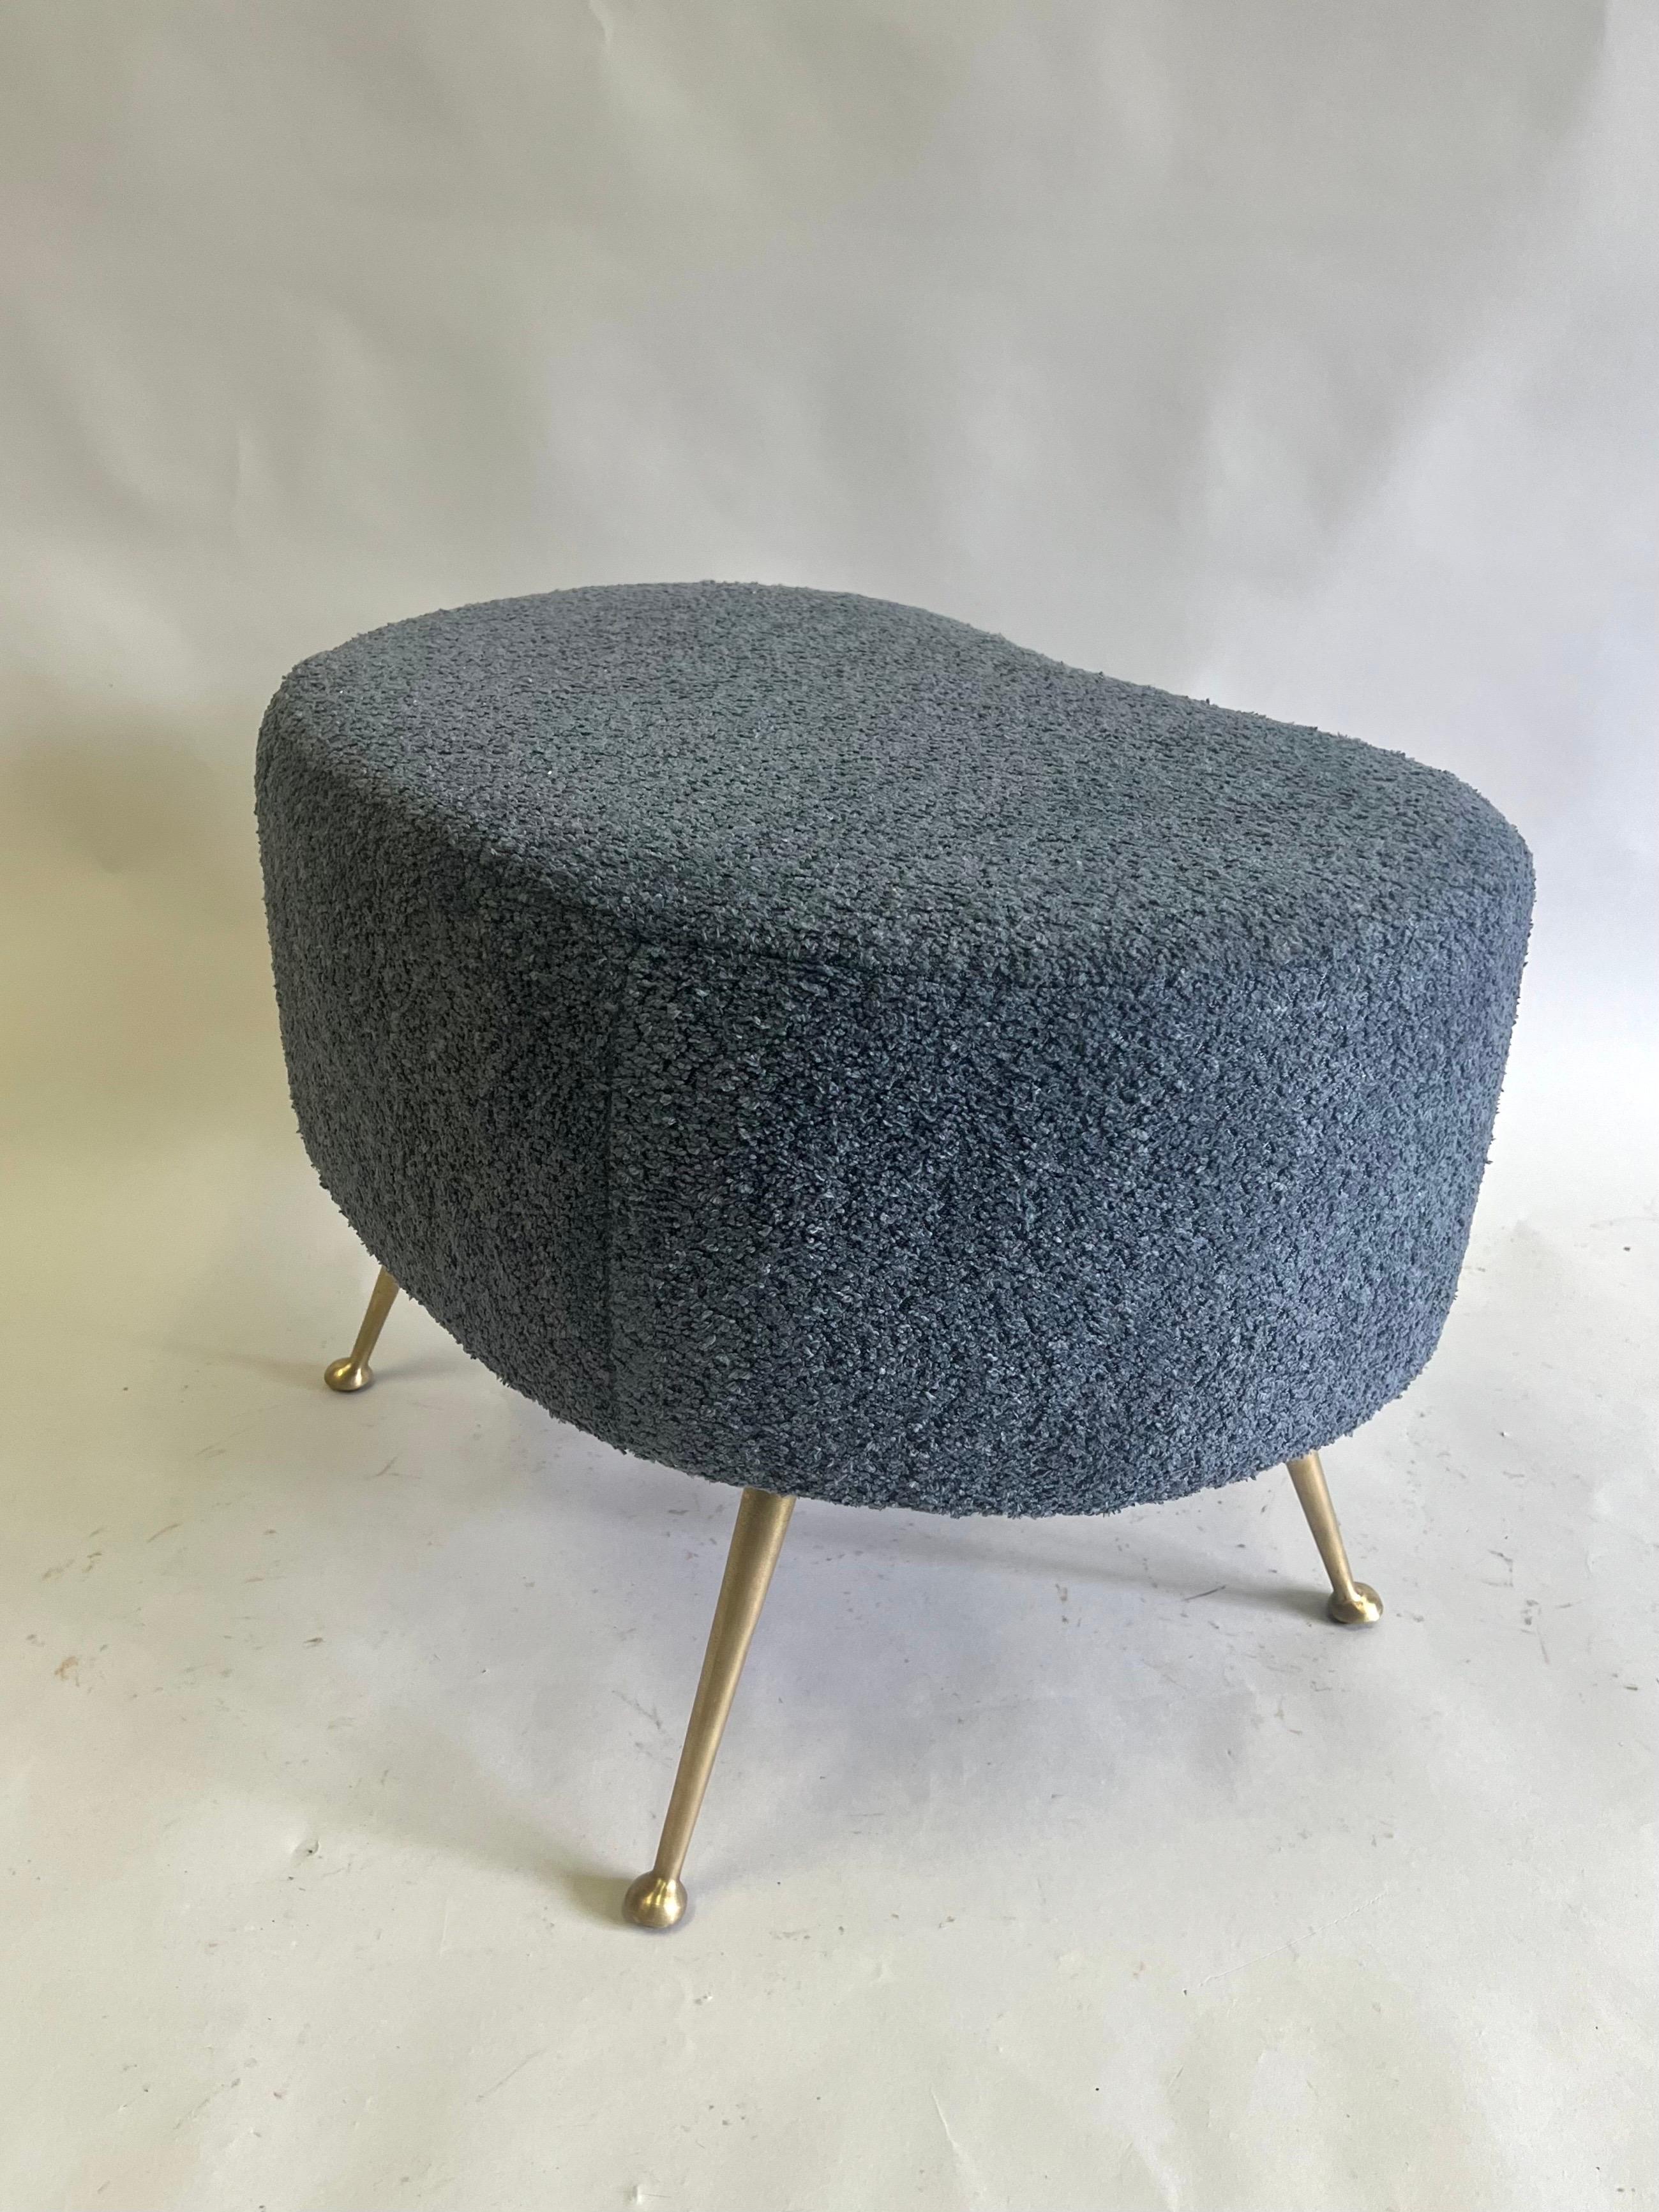 Pair of Italian Mid-Century Organic Modern Stools attributed to Marco Zanuso For Sale 4